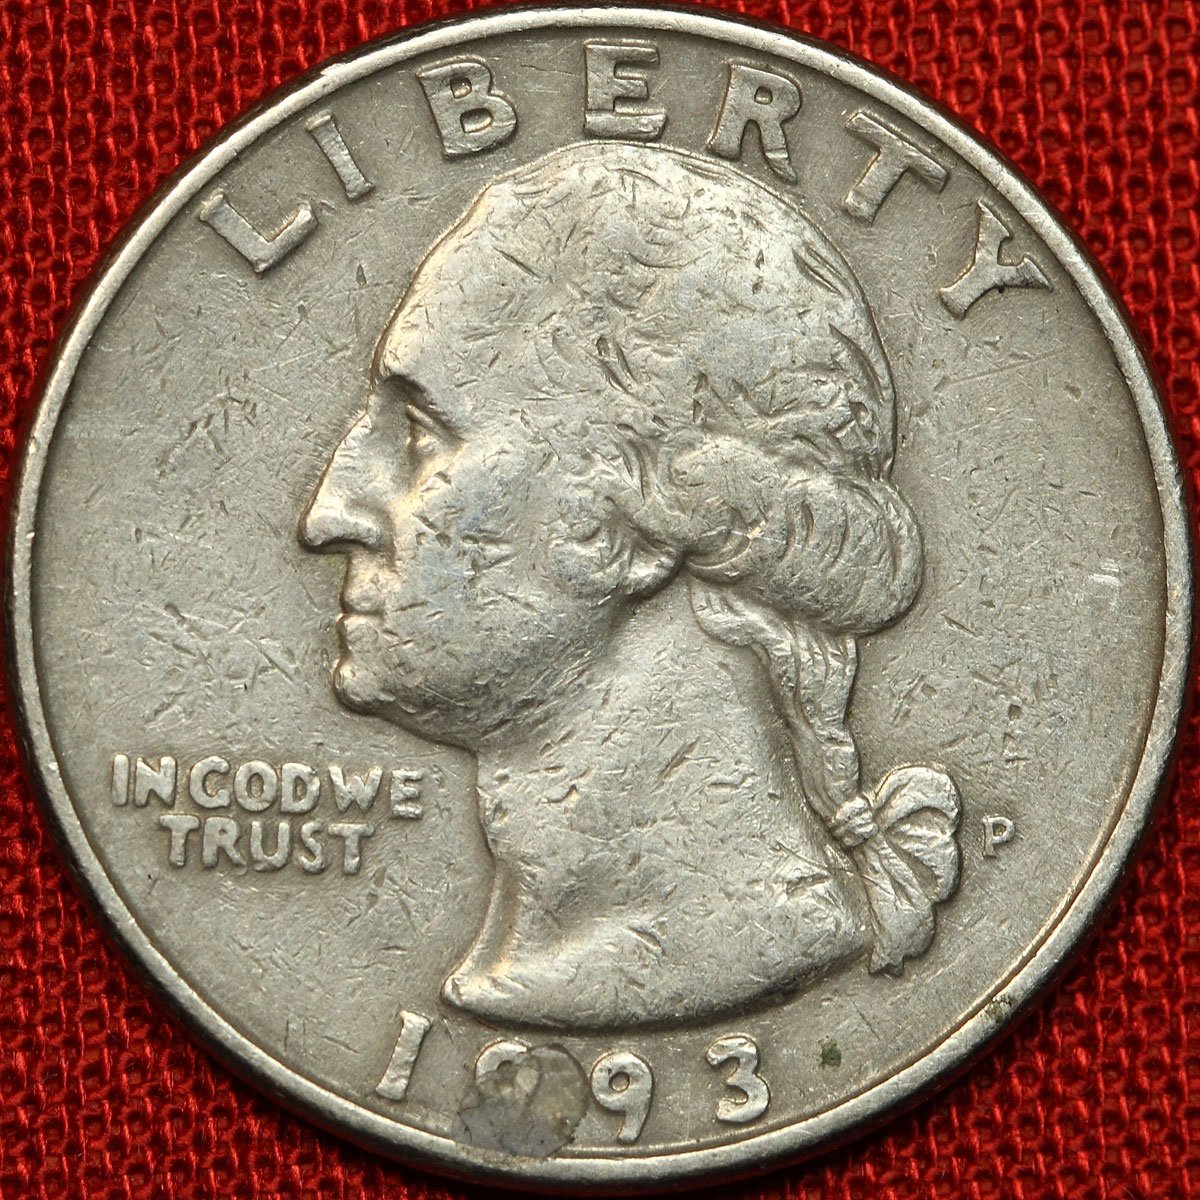 valuble american coins